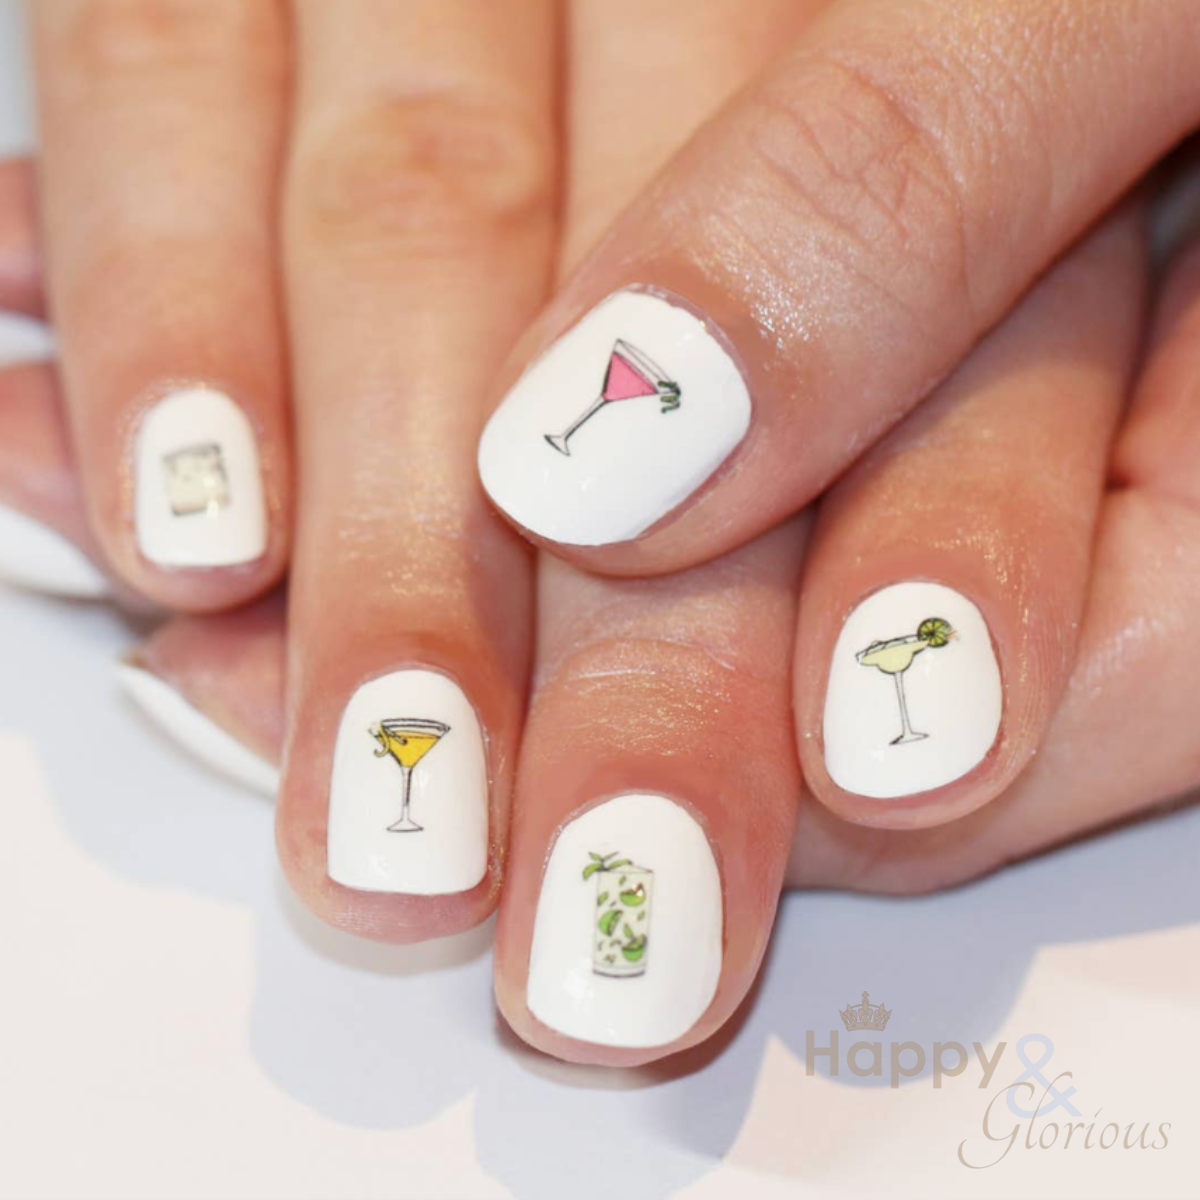 Party cocktail nail art transfers - pack of 24